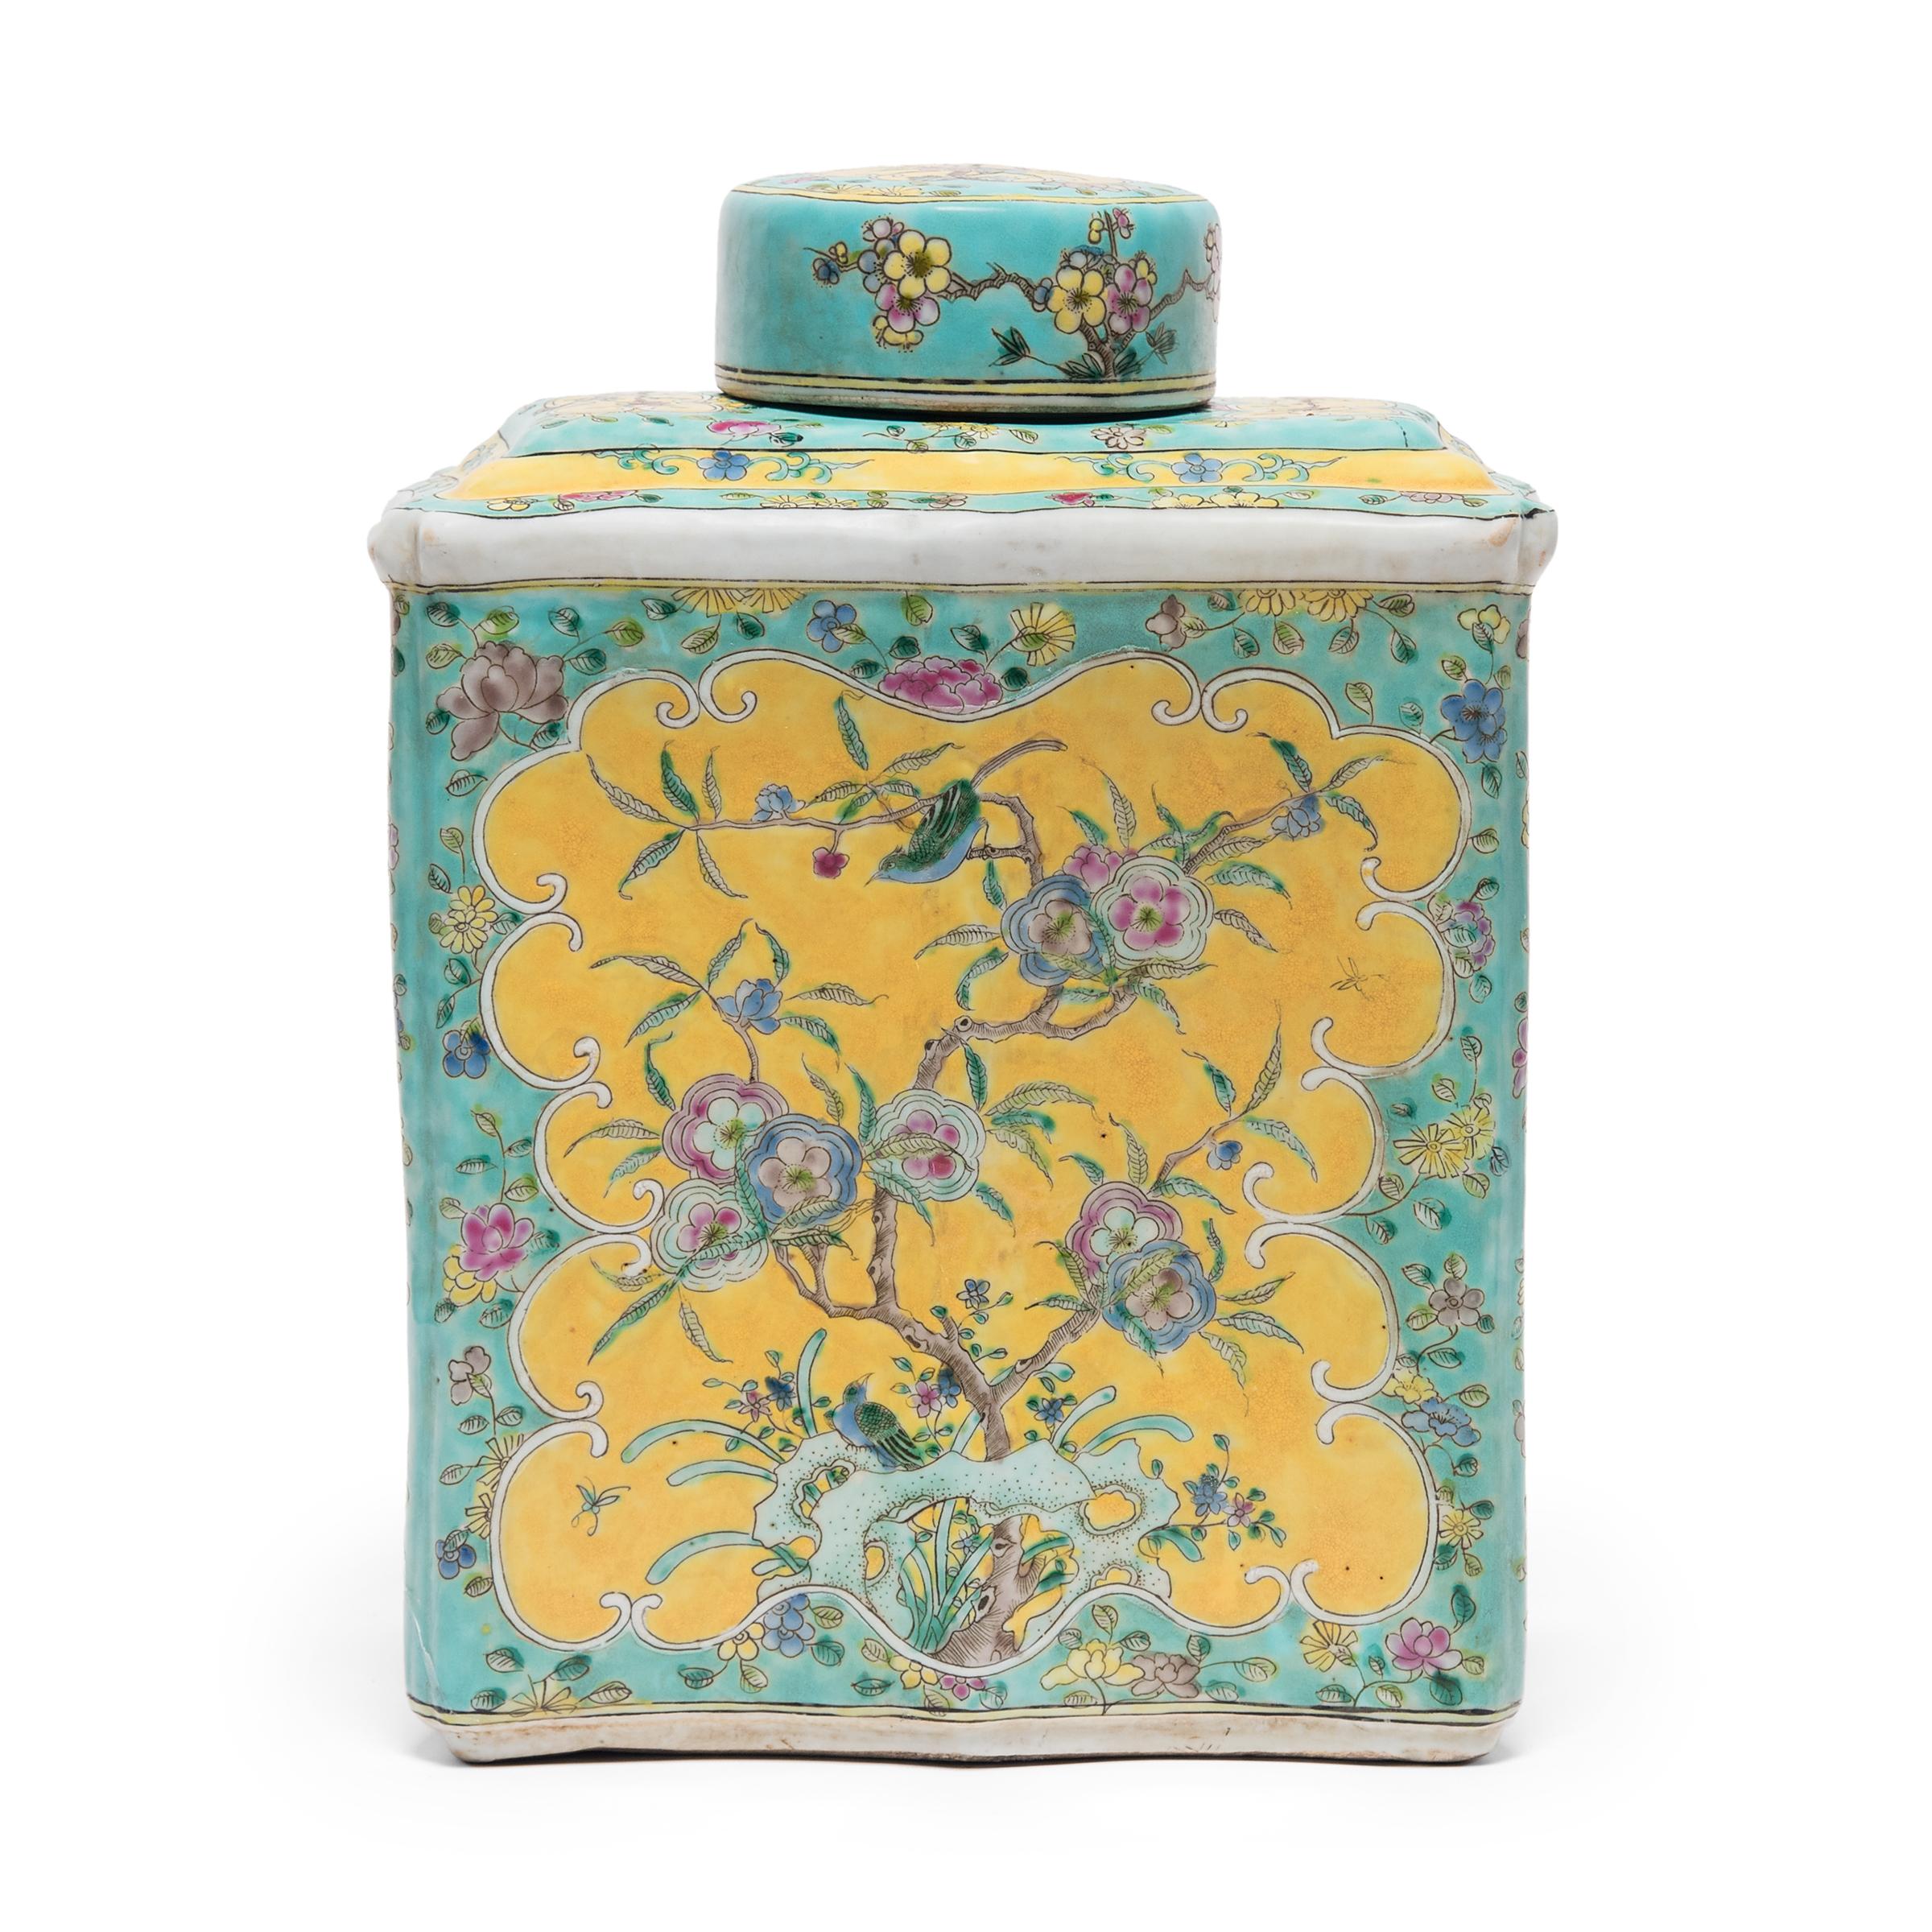 Brightly colored in yellow and turquoise, this impressive tea leaf jar is decorated in a style of overglaze enameling known as 